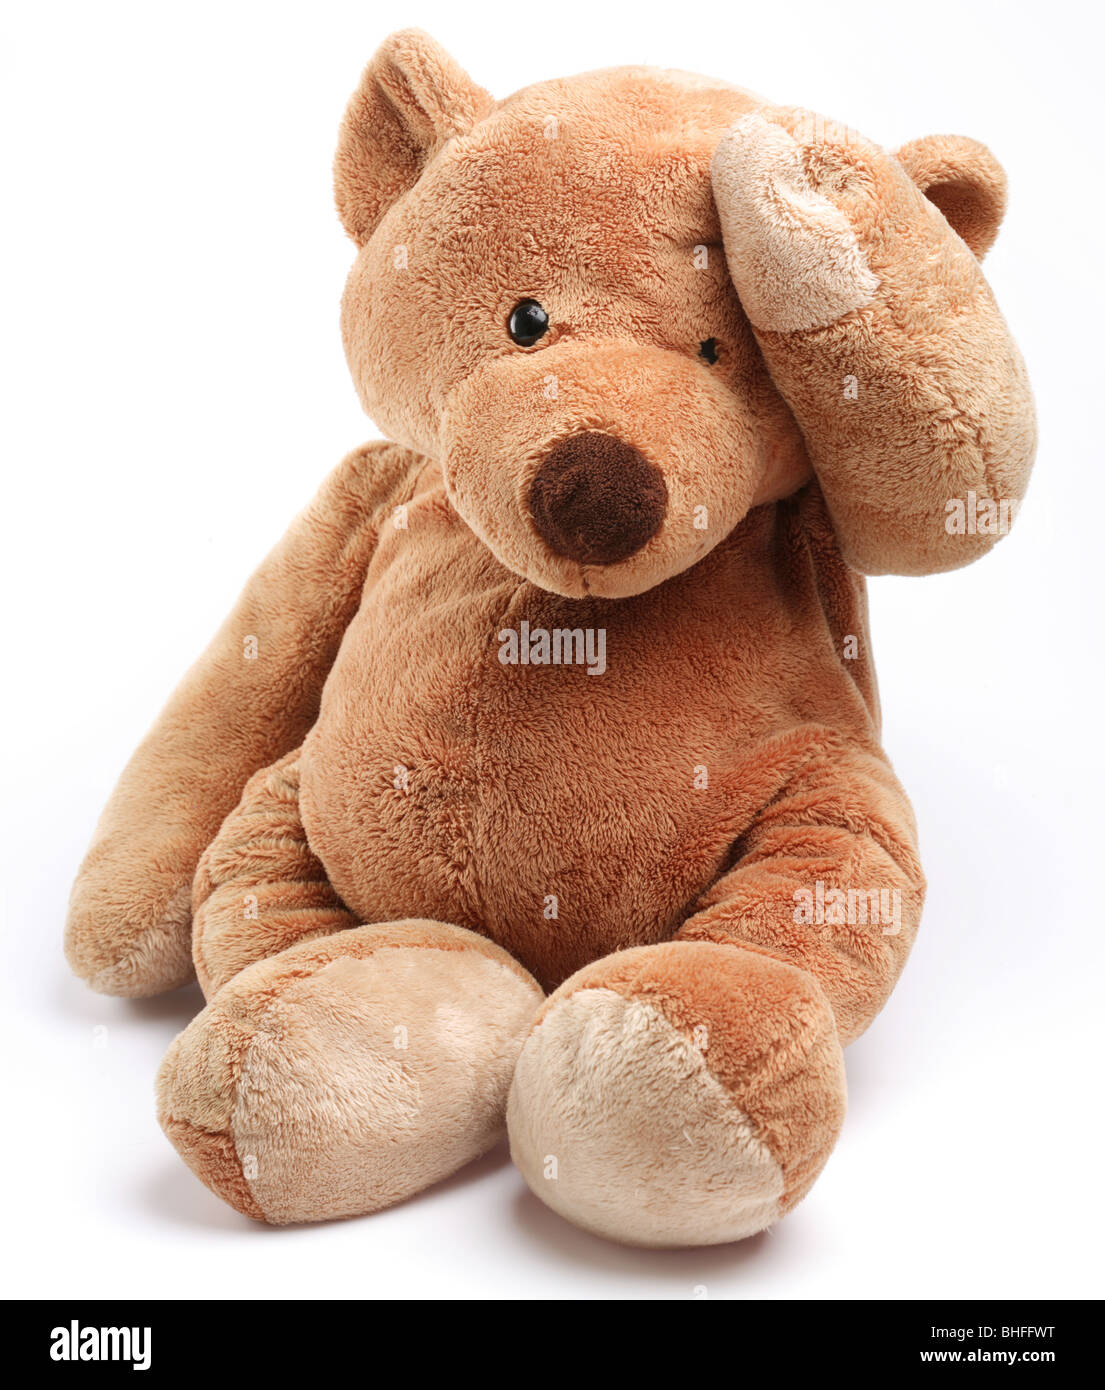 Teddy bear in a worry. Isolated over white. Stock Photo